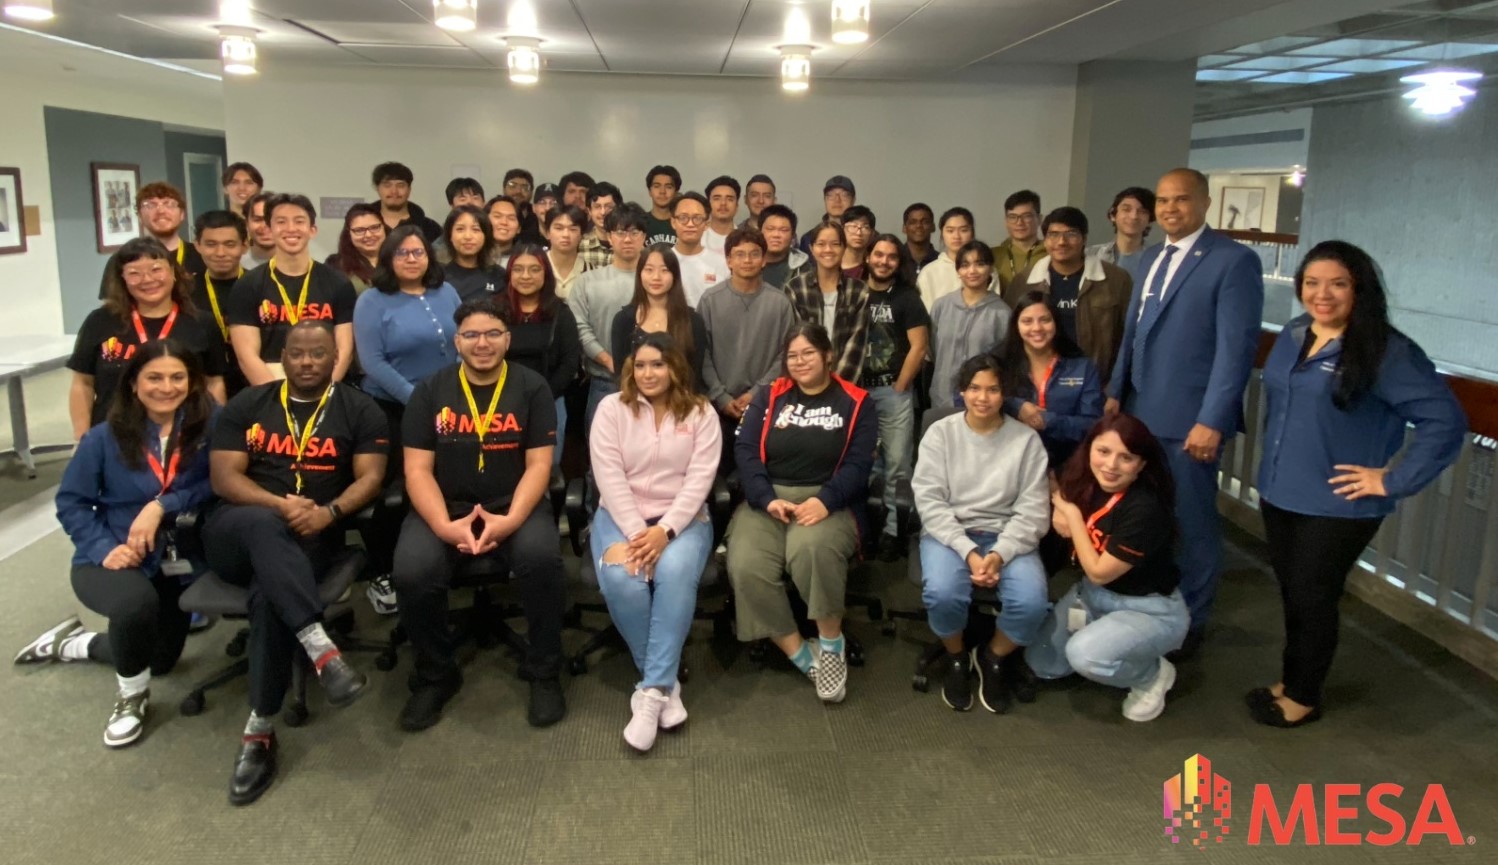 MESA cohort in spring 2024. Dr. Thayer, Cypress College President joined orientation to welcome students into the MESA program.